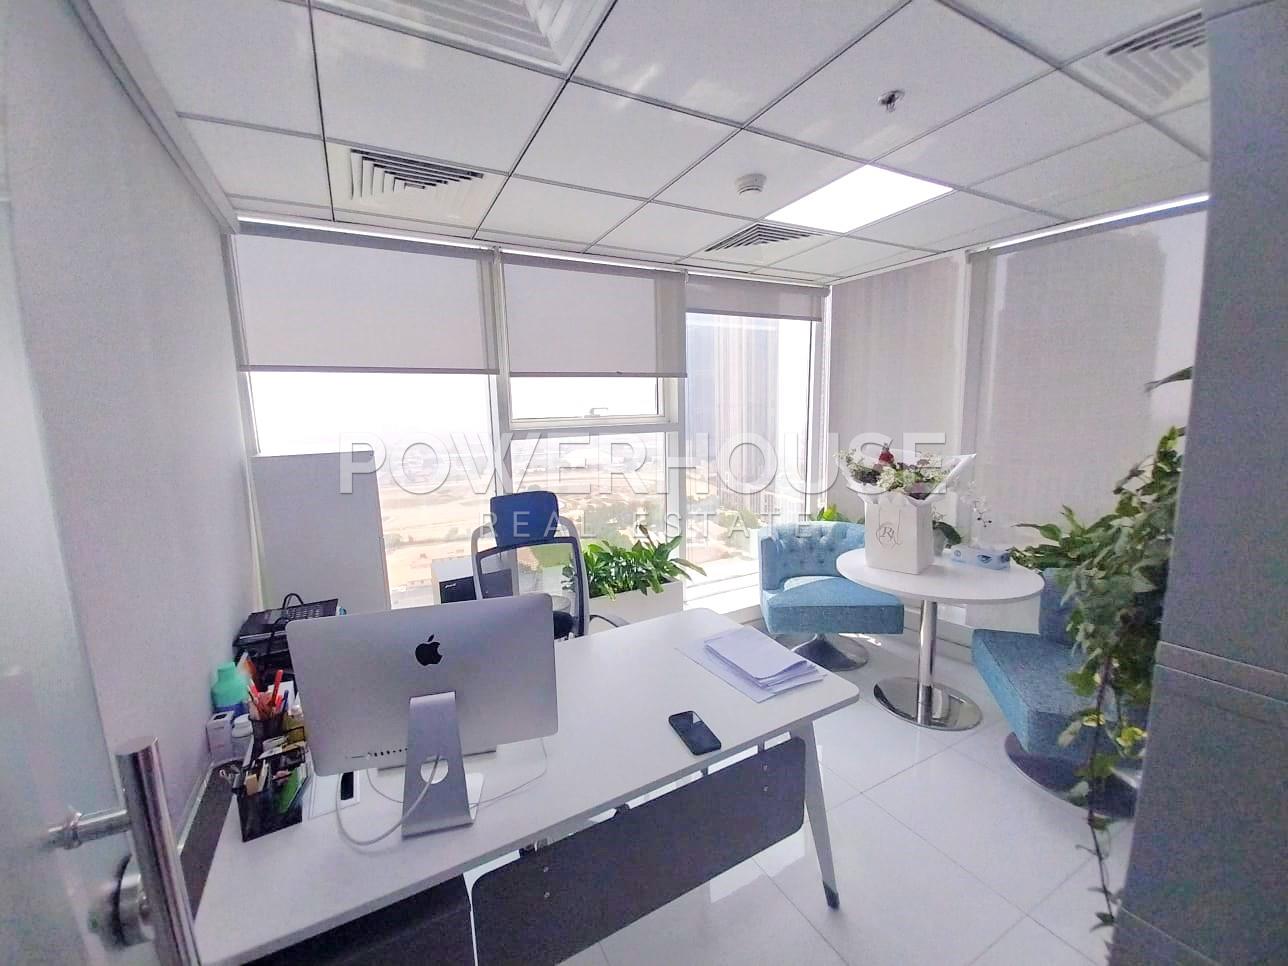 Office Space For Rent in Al Manara Tower, Business Bay, Dubai - 6139790